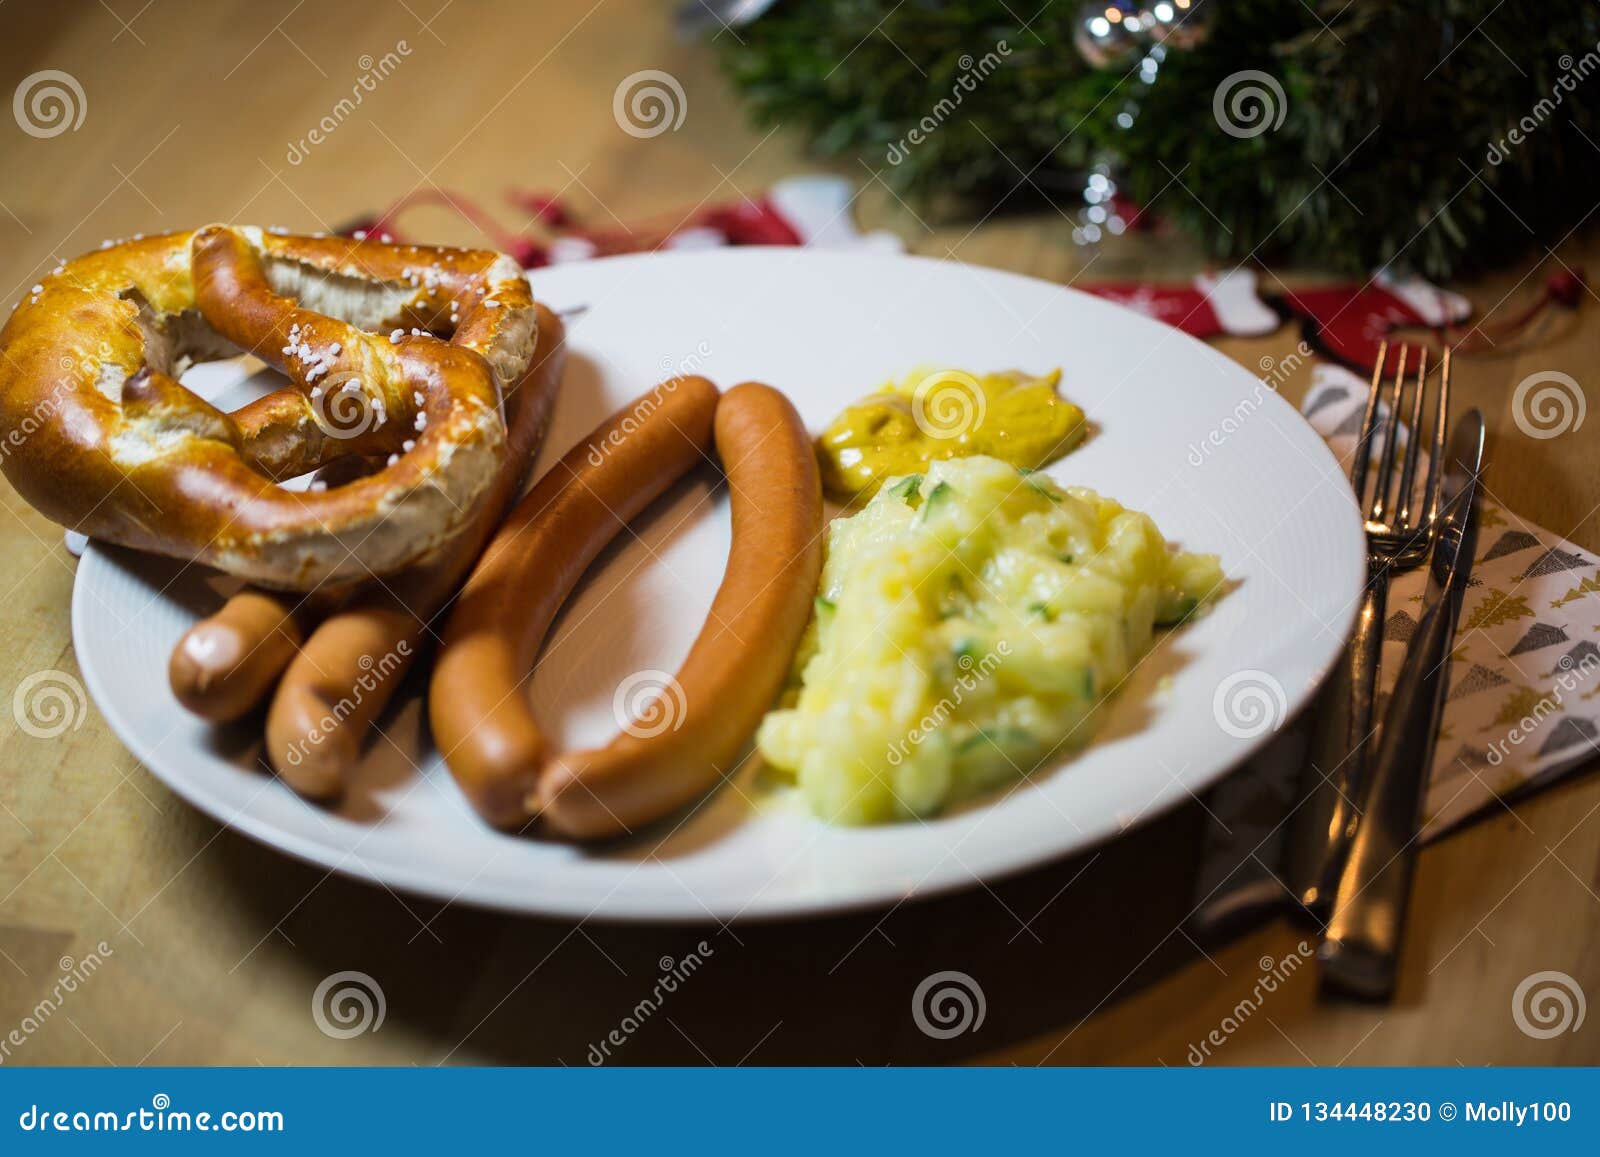 Traditional Christmas Dinner In Germany, Sausages And ...